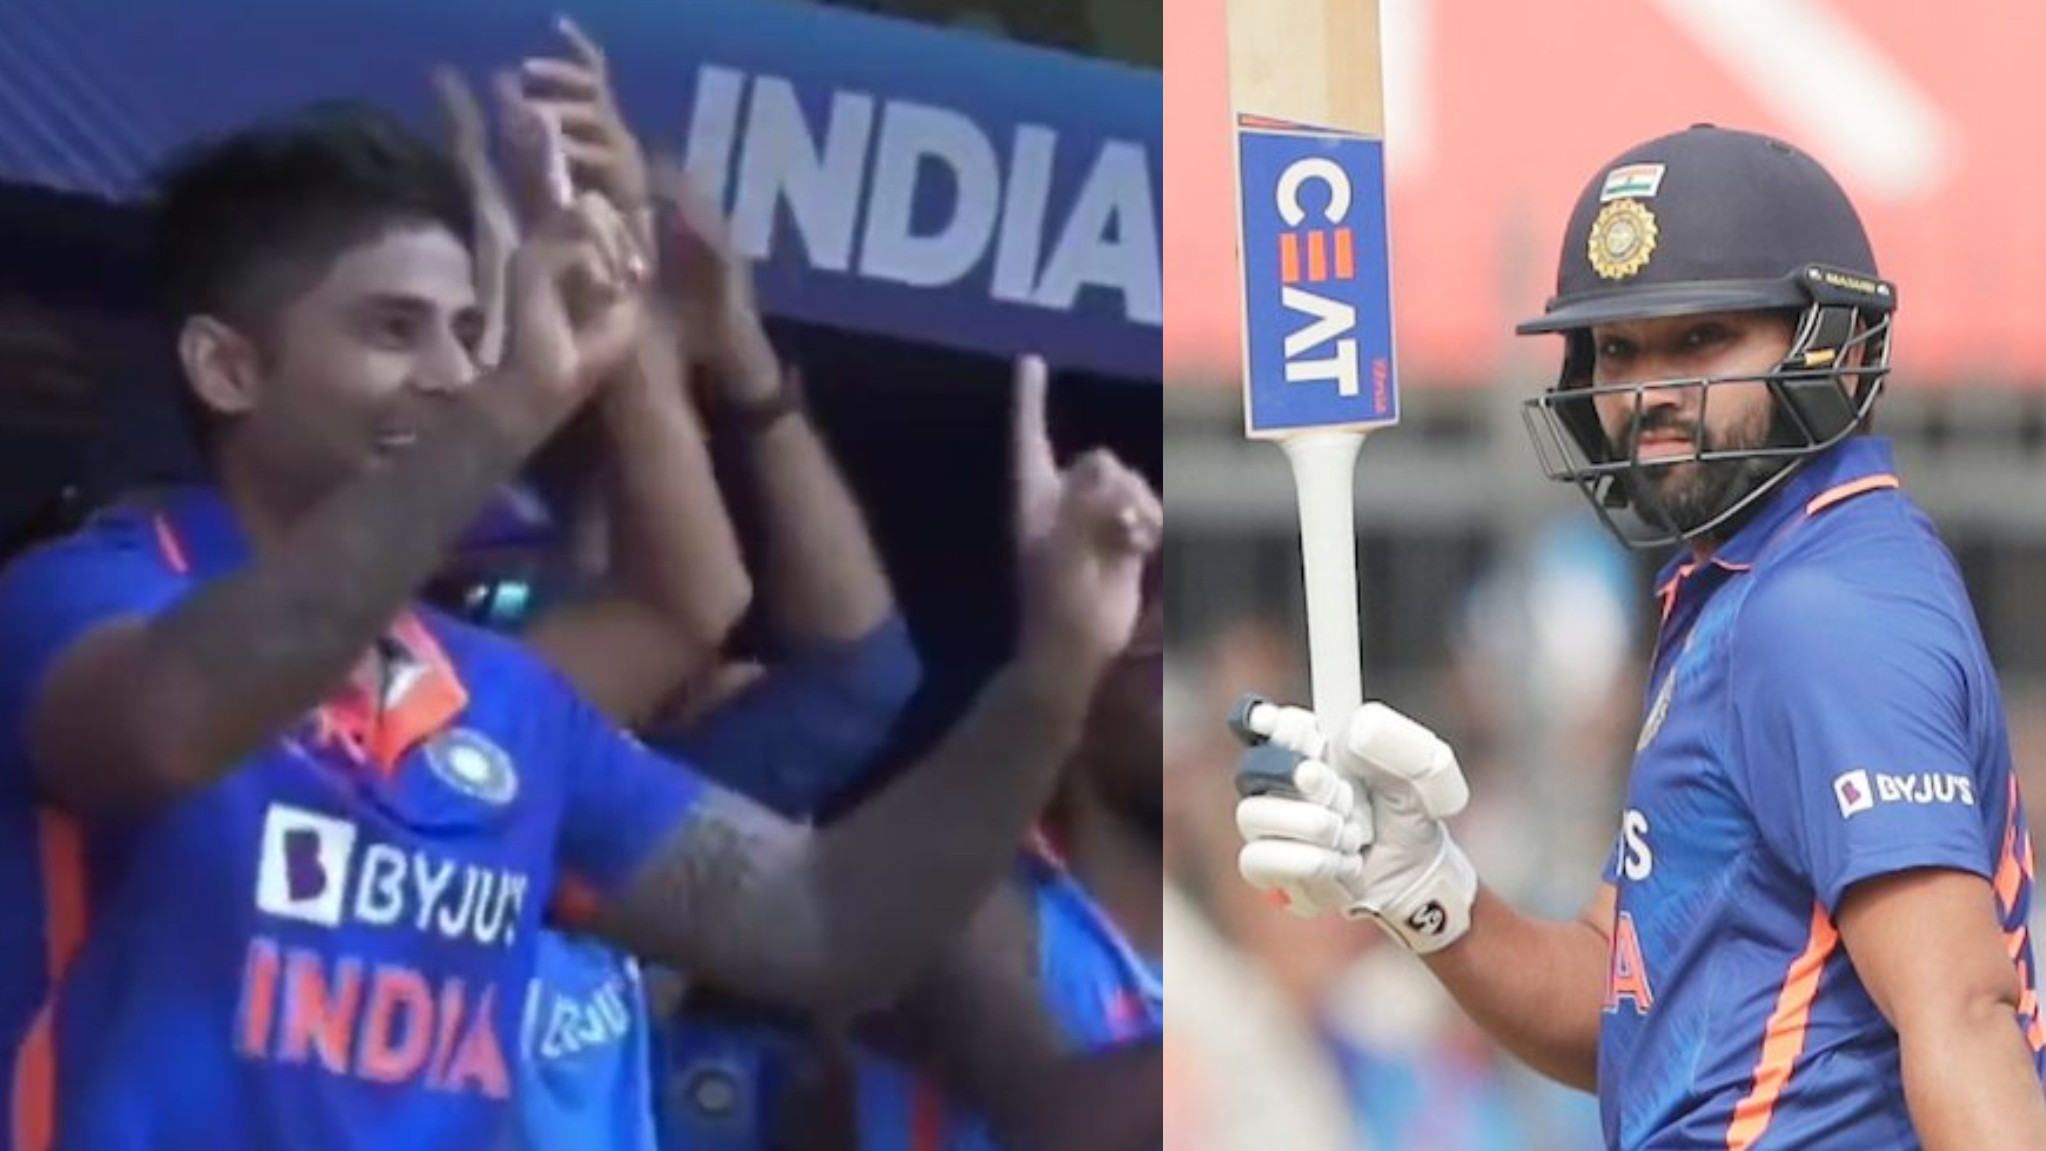 IND v NZ 2023: WATCH- Suryakumar Yadav signals to Rohit Sharma to get a double as he celebrated his 30th ODI century